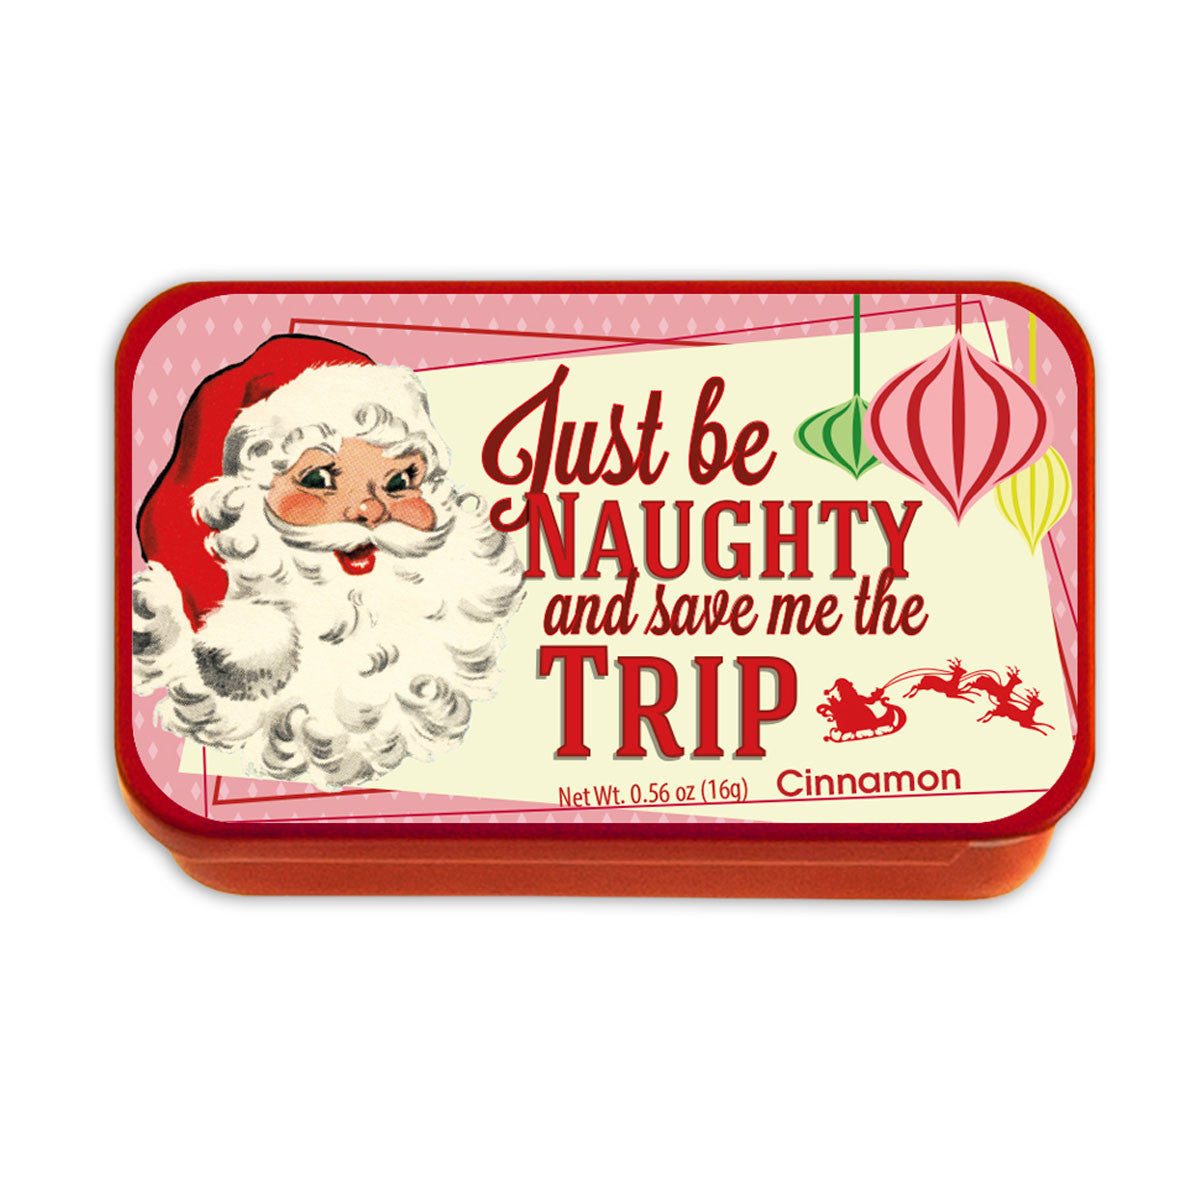 10 NAUGHTY GIFT IDEAS — NAUGHTY EVENTS